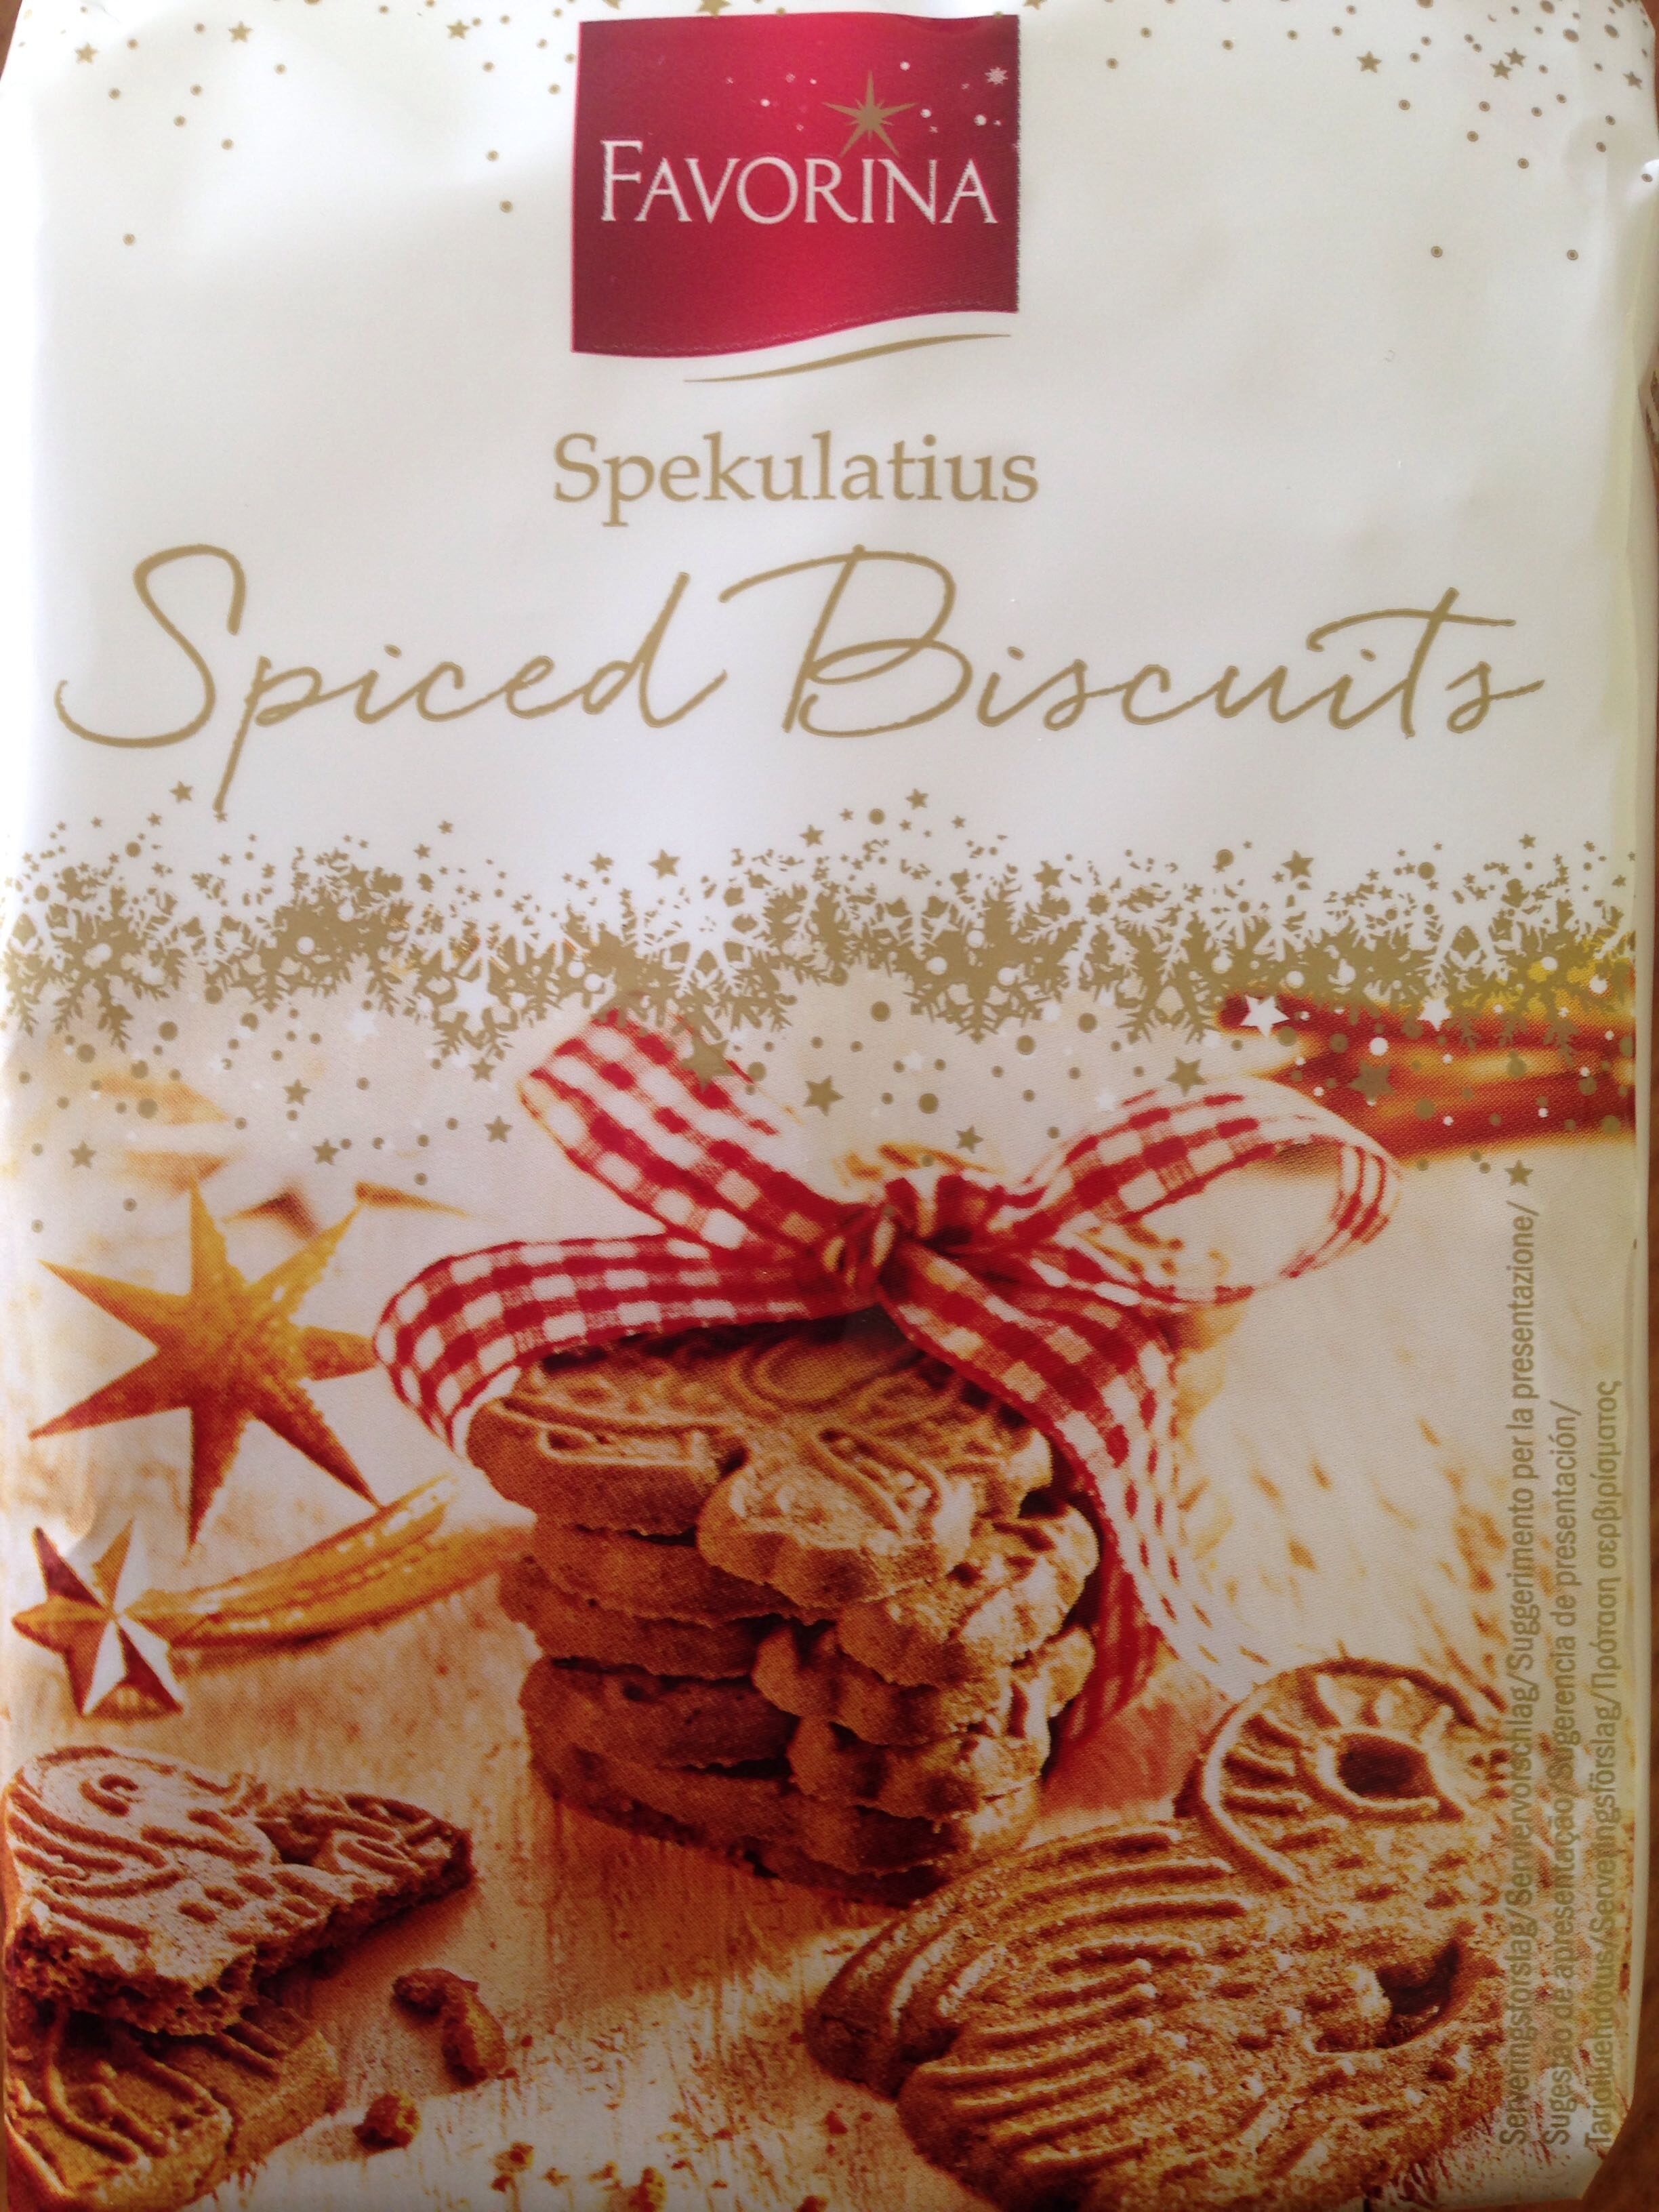 Spiced biscuits - Product